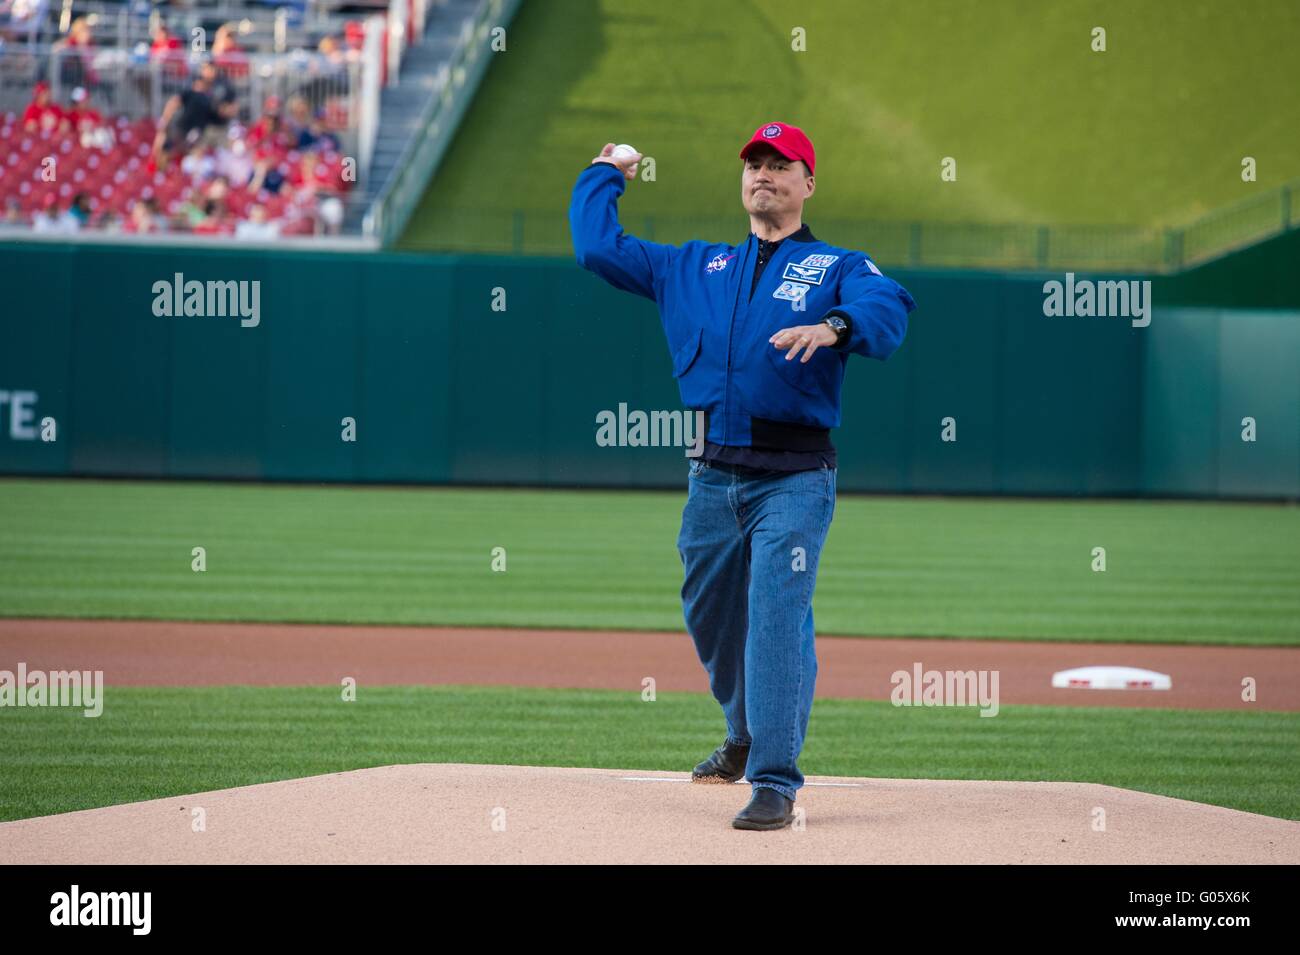 NASA astronaut Kjell Lindgren throws out the ceremonial first pitch before the Washington Nationals take on the Philadelphia Phillies at Nationals Park April 26, 2016 in Washington, DC. Lindgren spent 141 days aboard the International Space Station as part of Expeditions 44 and 45. Stock Photo